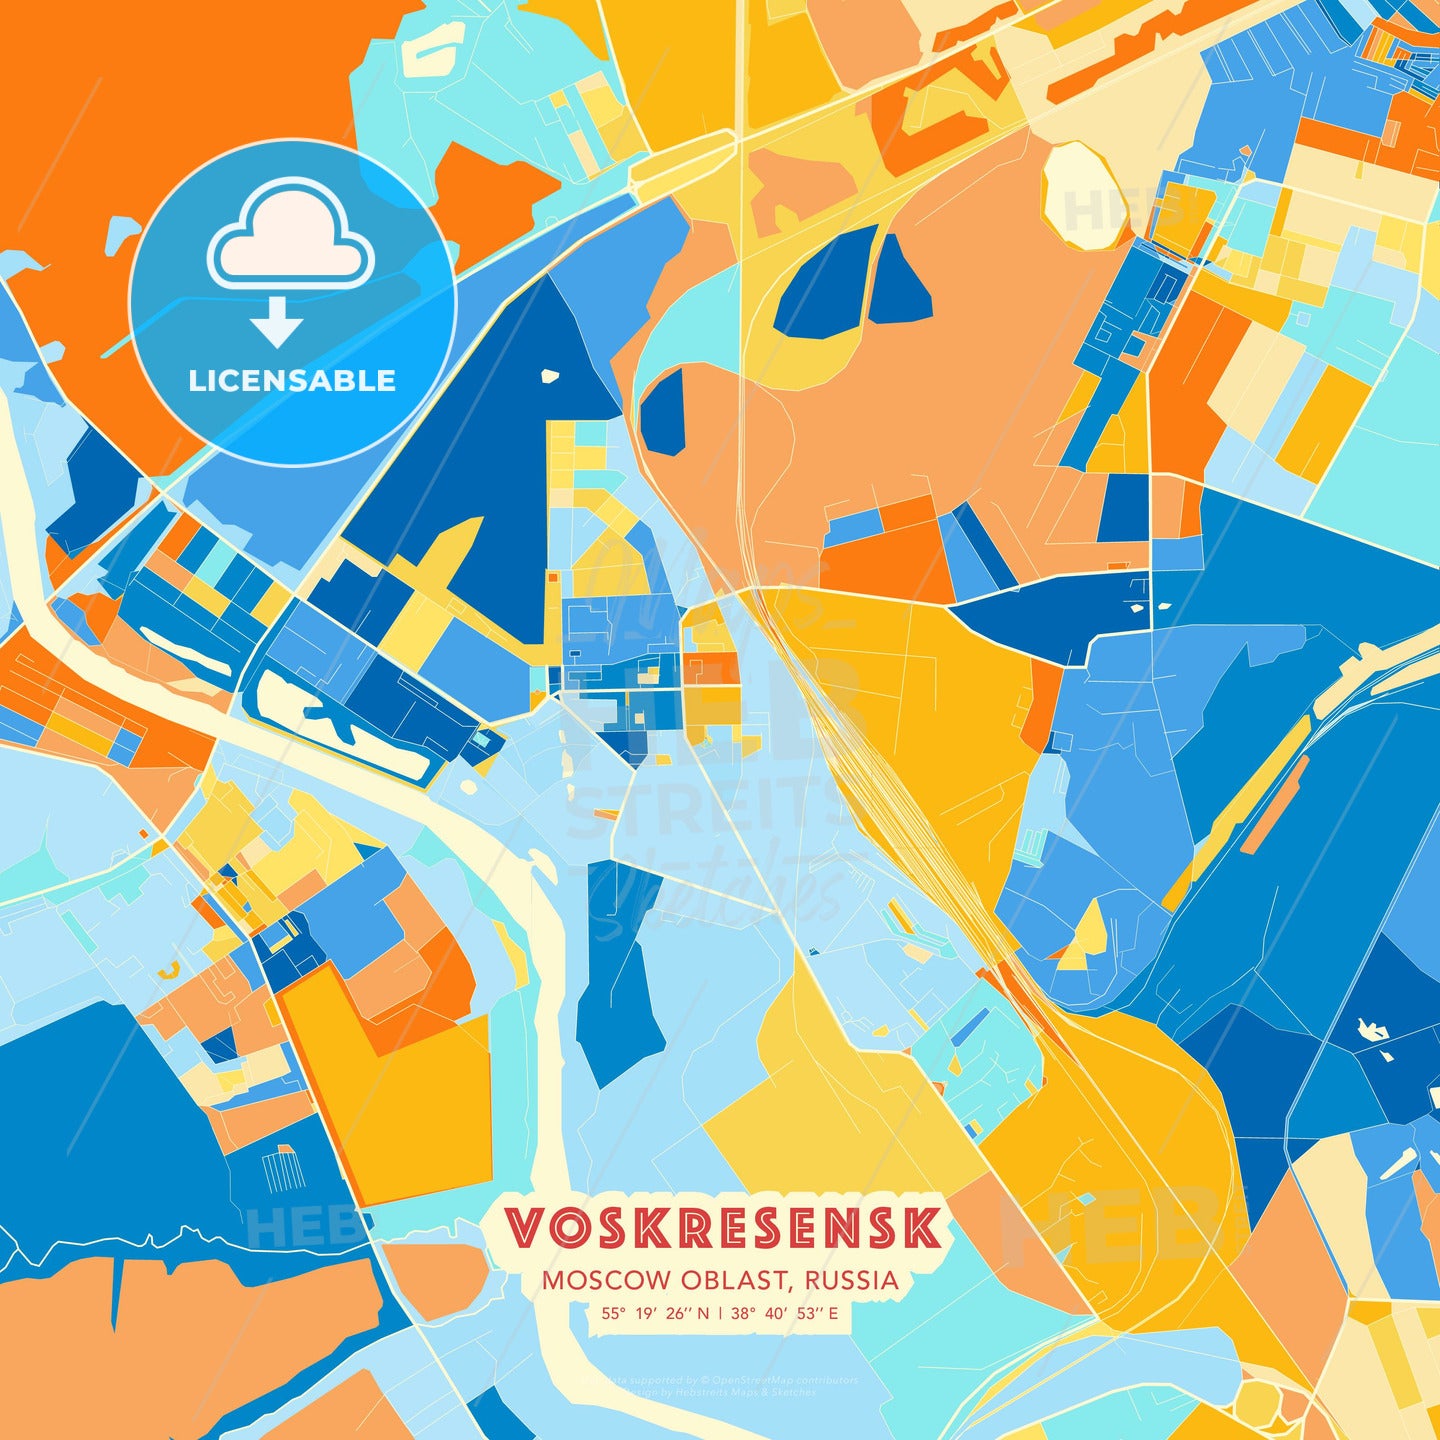 Voskresensk, Moscow Oblast, Russia, map - HEBSTREITS Sketches